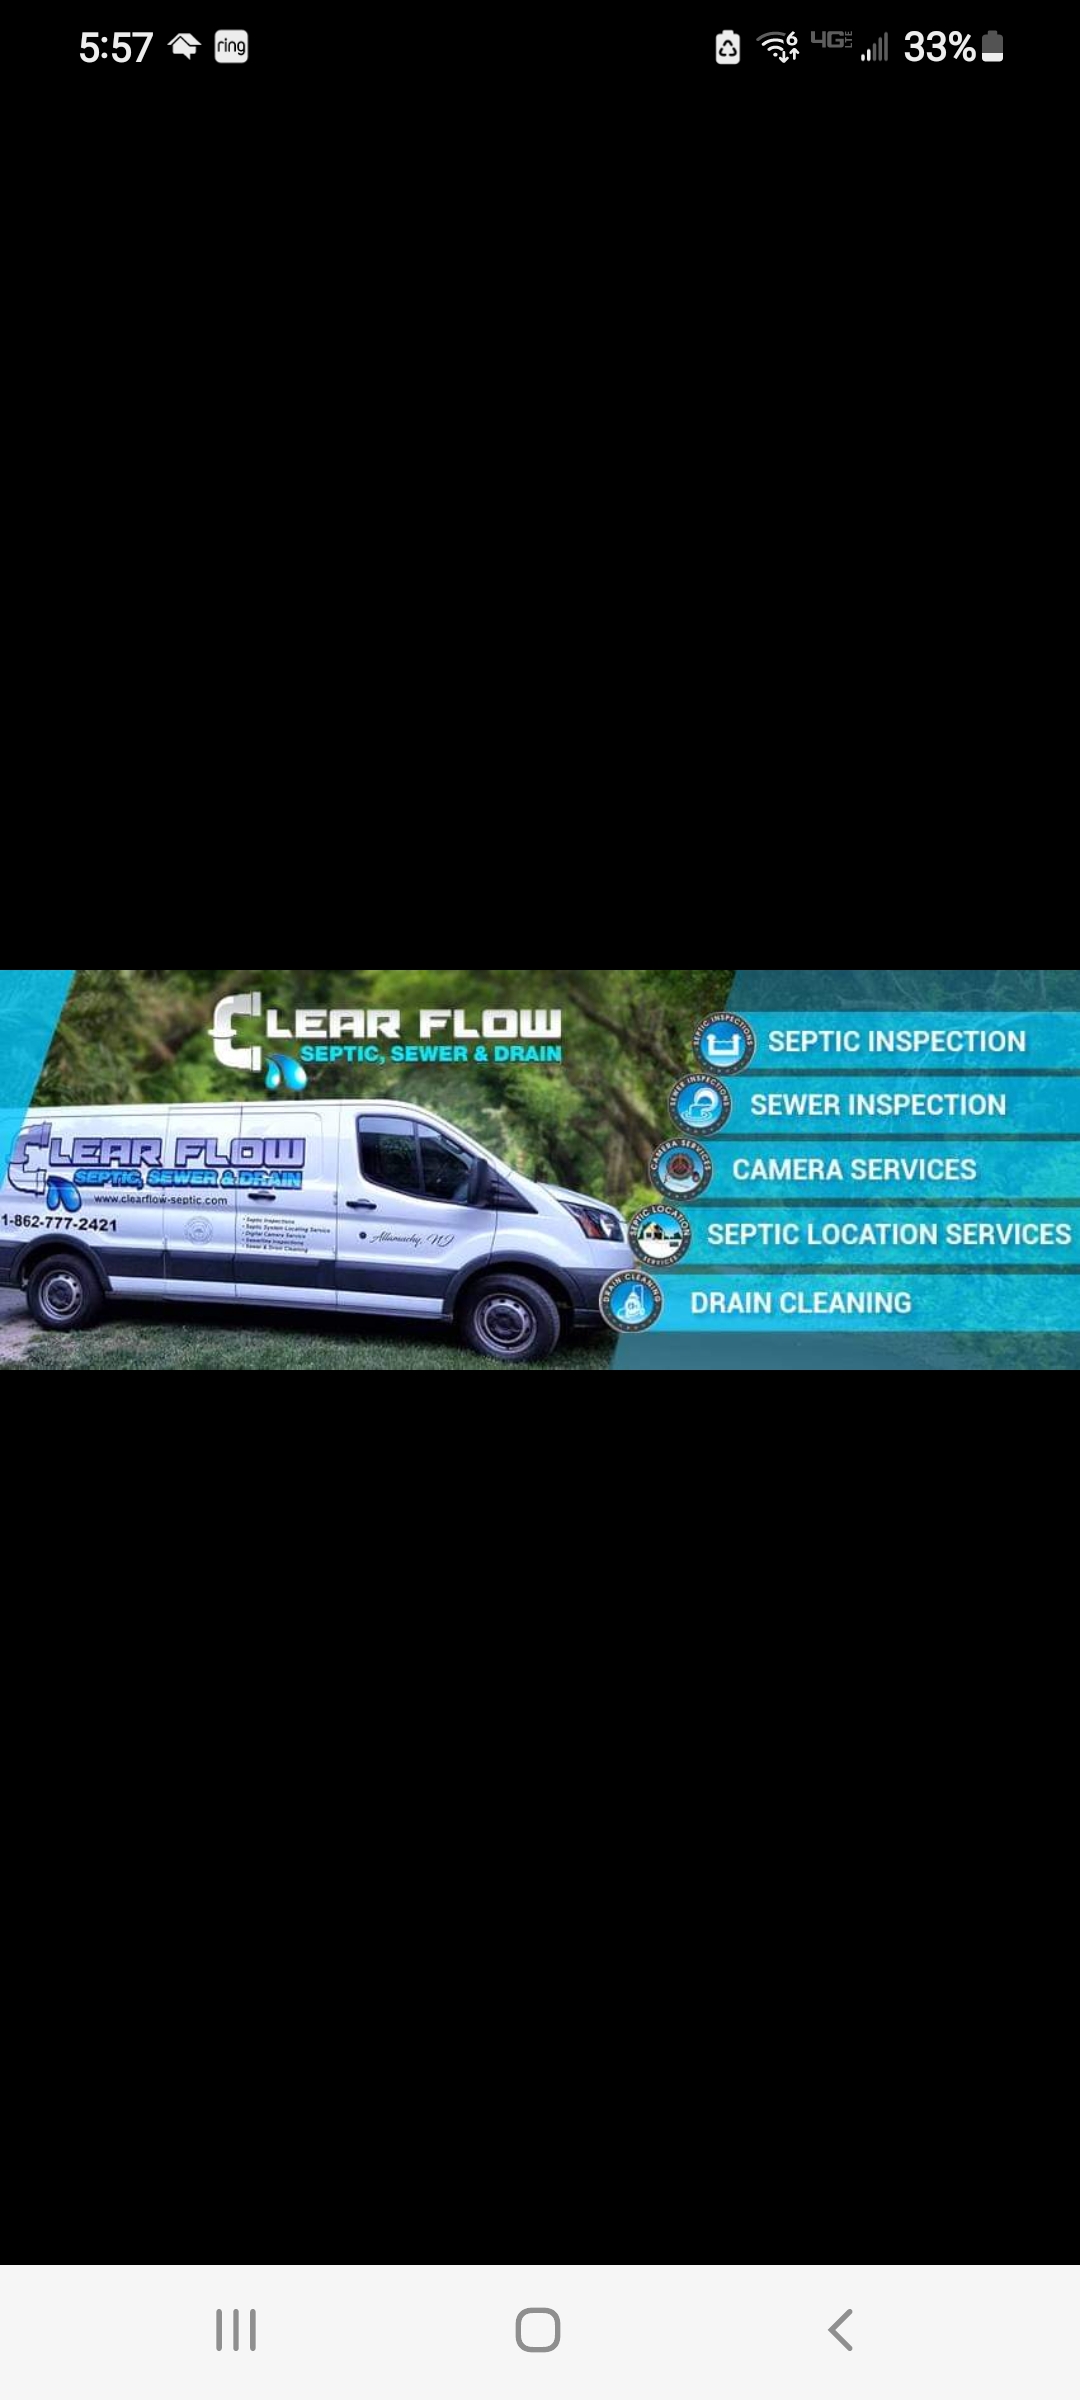 Clear Flow Septic, Sewer, & Drain Logo